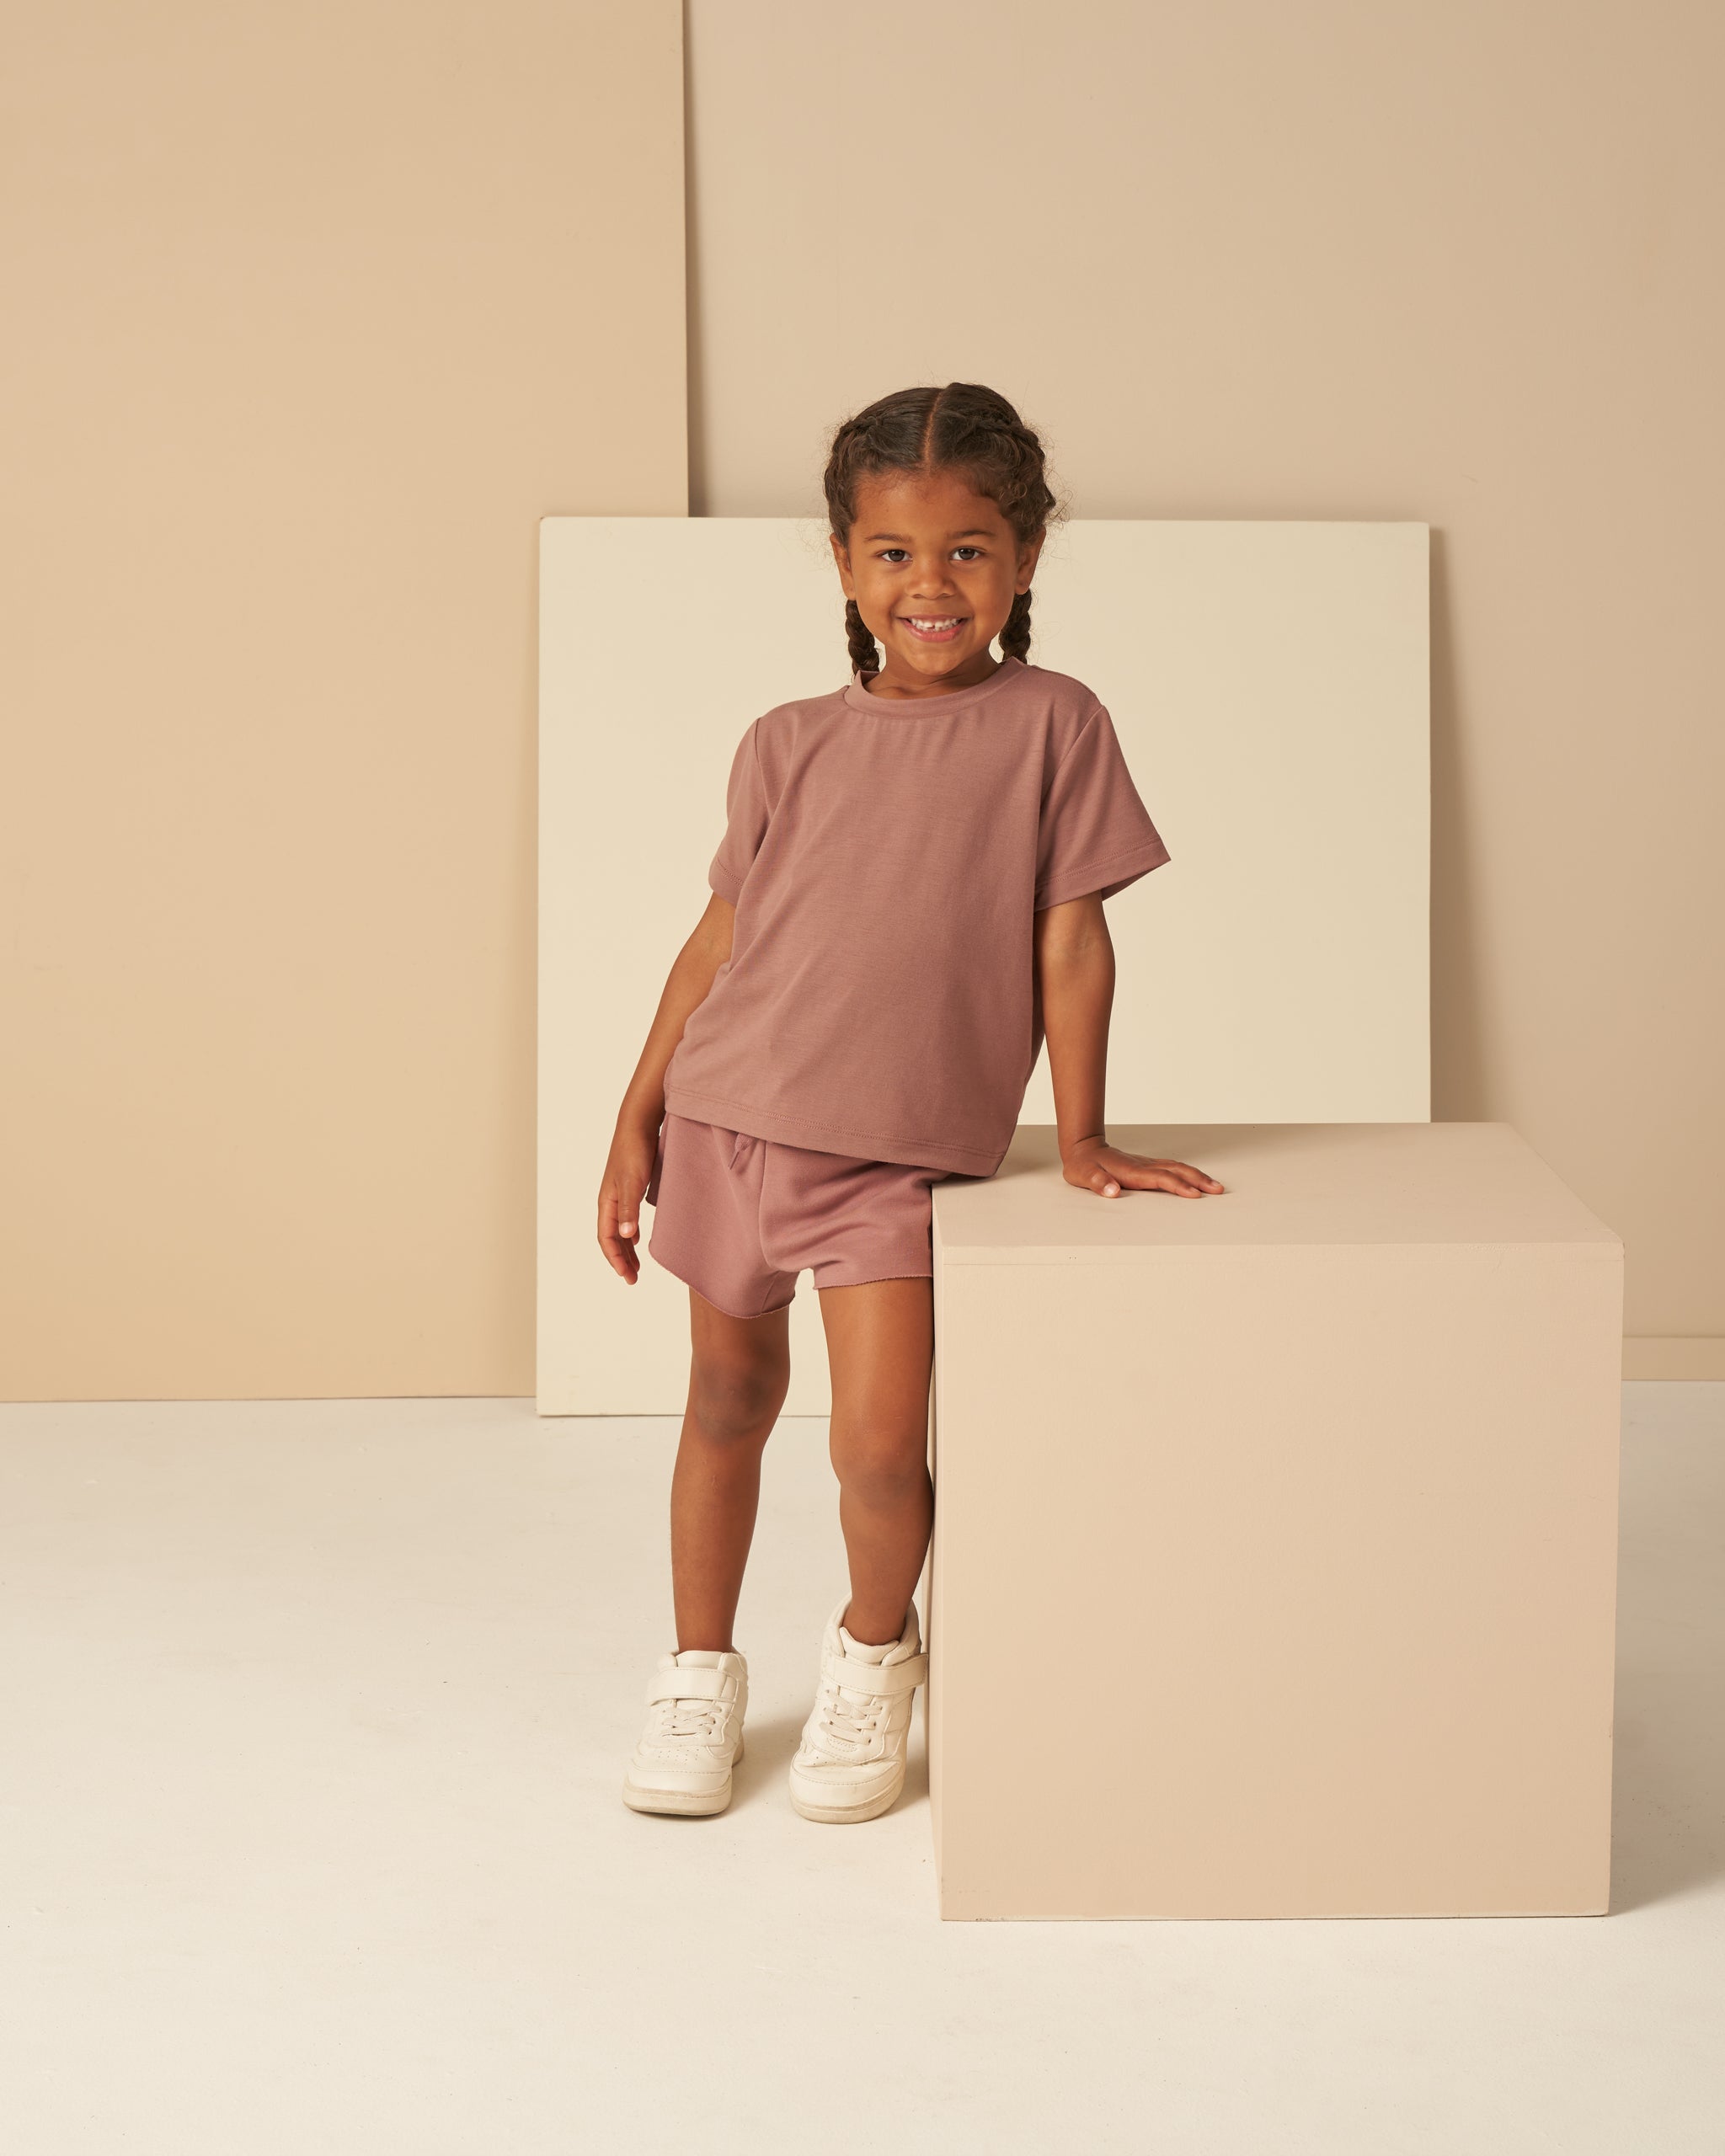 Sweat Short || Mulberry - Rylee + Cru | Kids Clothes | Trendy Baby Clothes | Modern Infant Outfits |